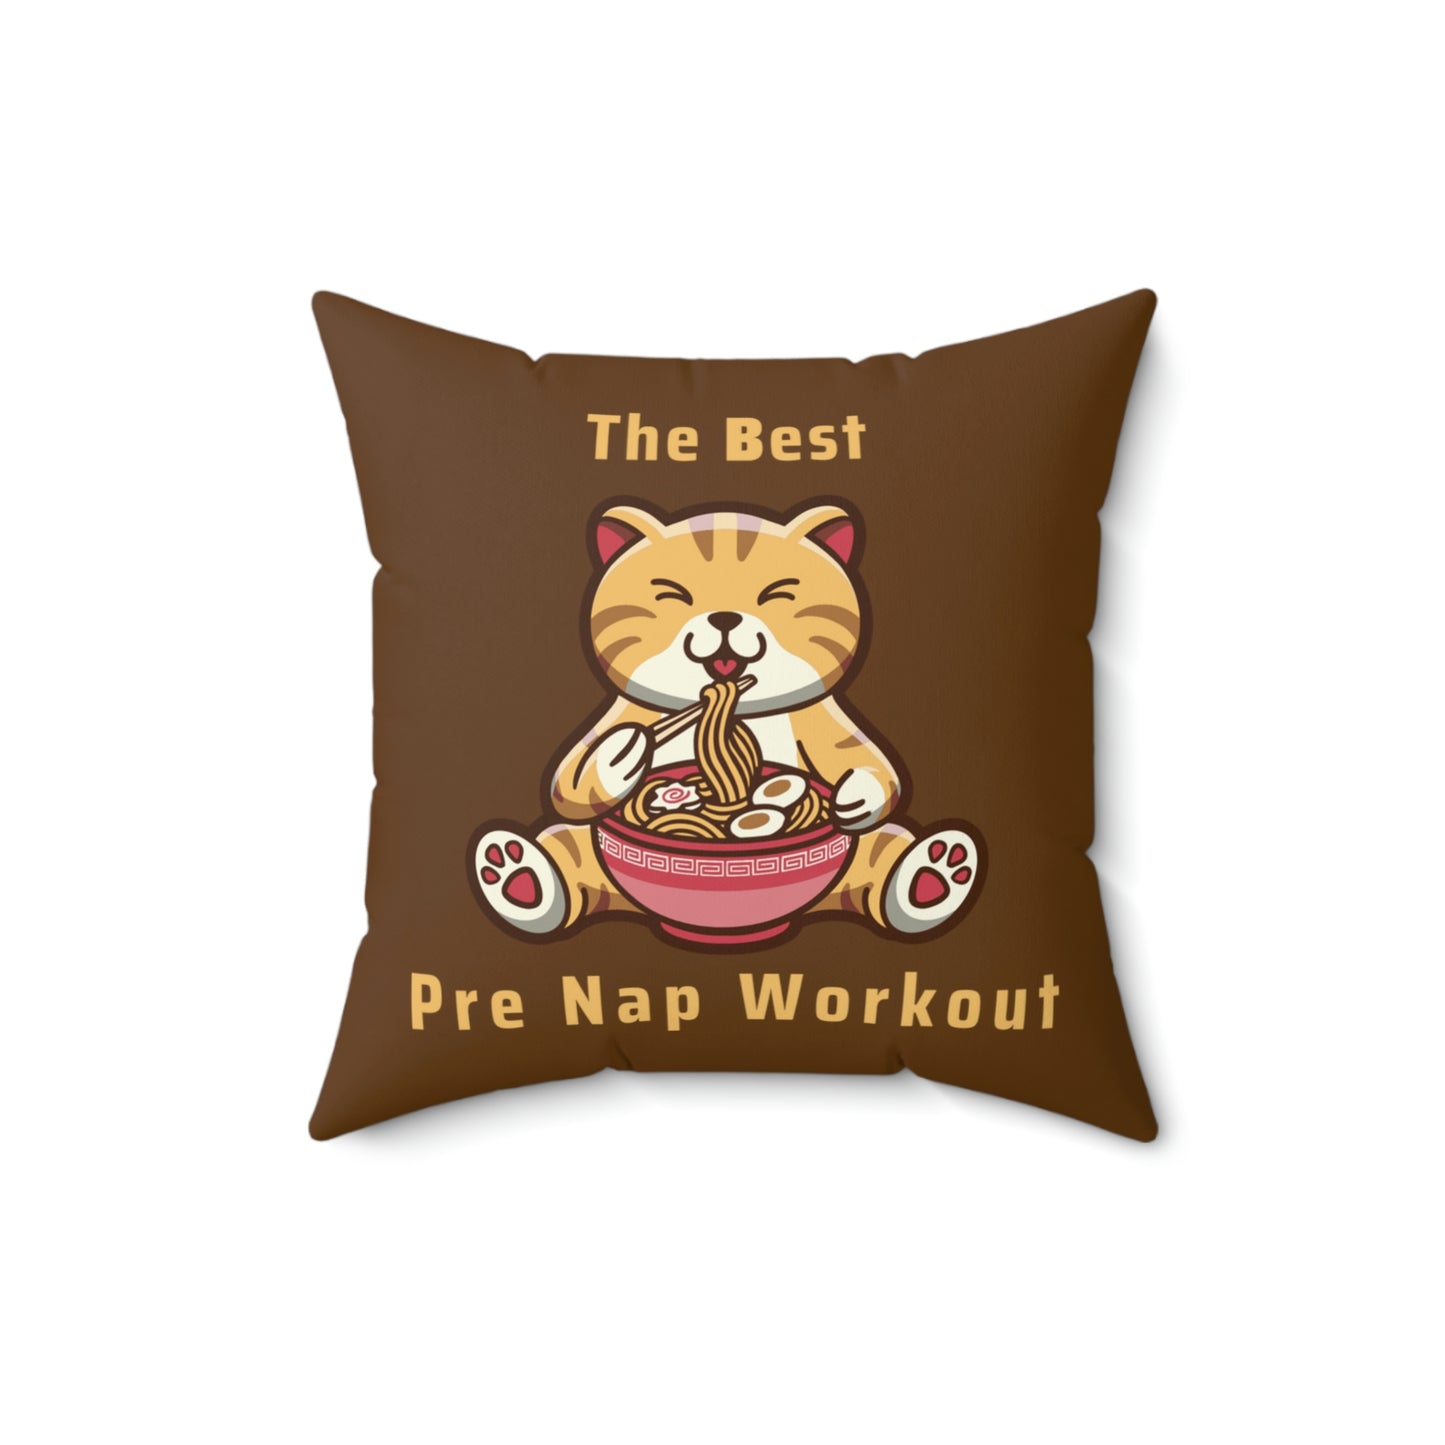 The Best Pre Nap Workout Spun Polyester Square Pillow | Happy Cat Pillow